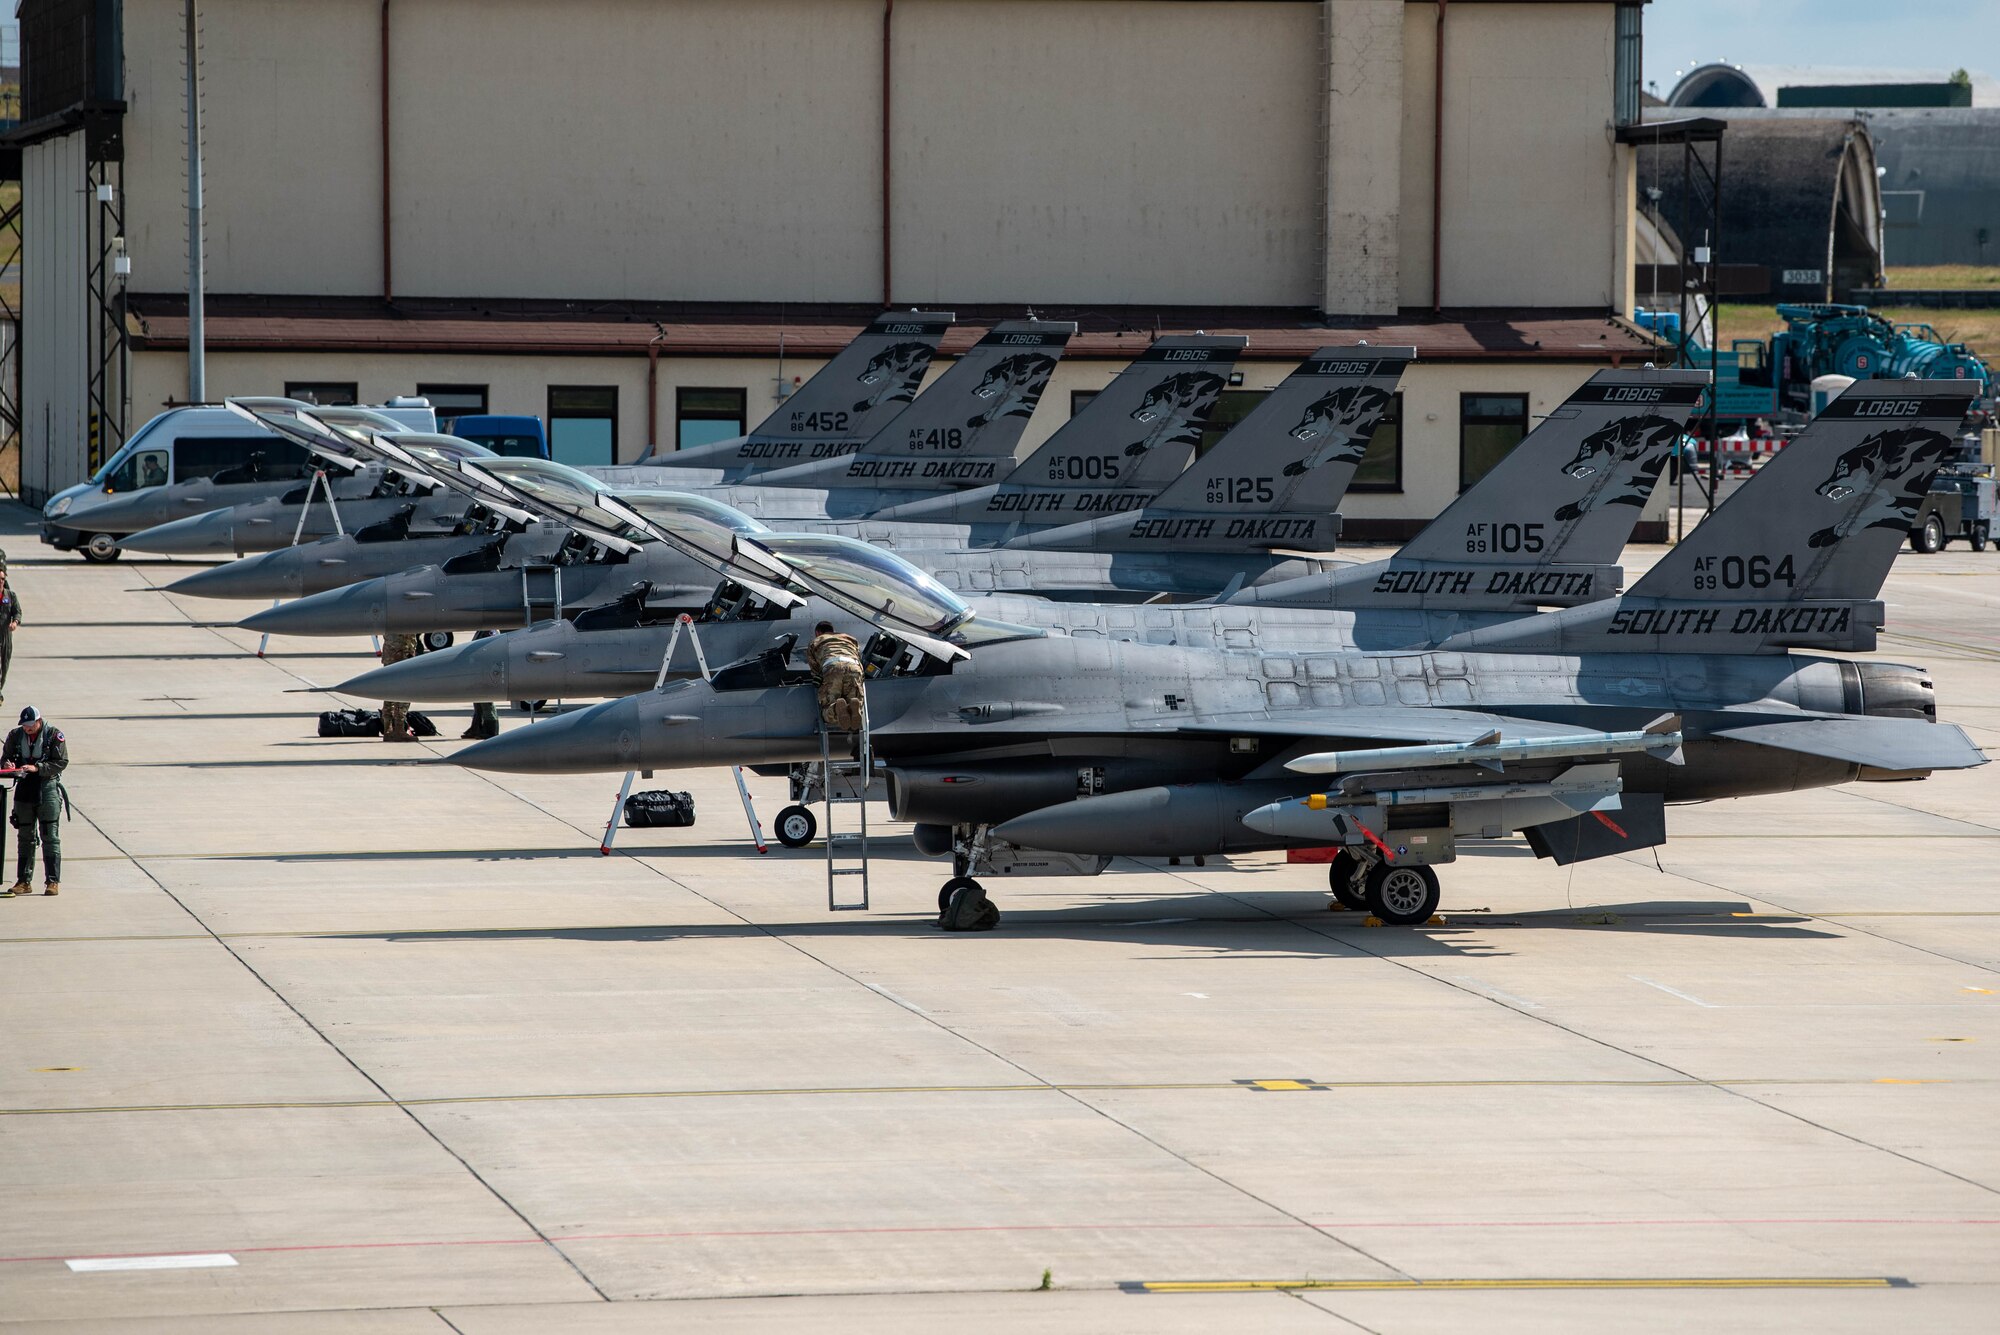 U.S. F-16 Fighting Falcon fighter aircraft, receive post-flight checks after landing at Spangdahlem Air Base, Germany.